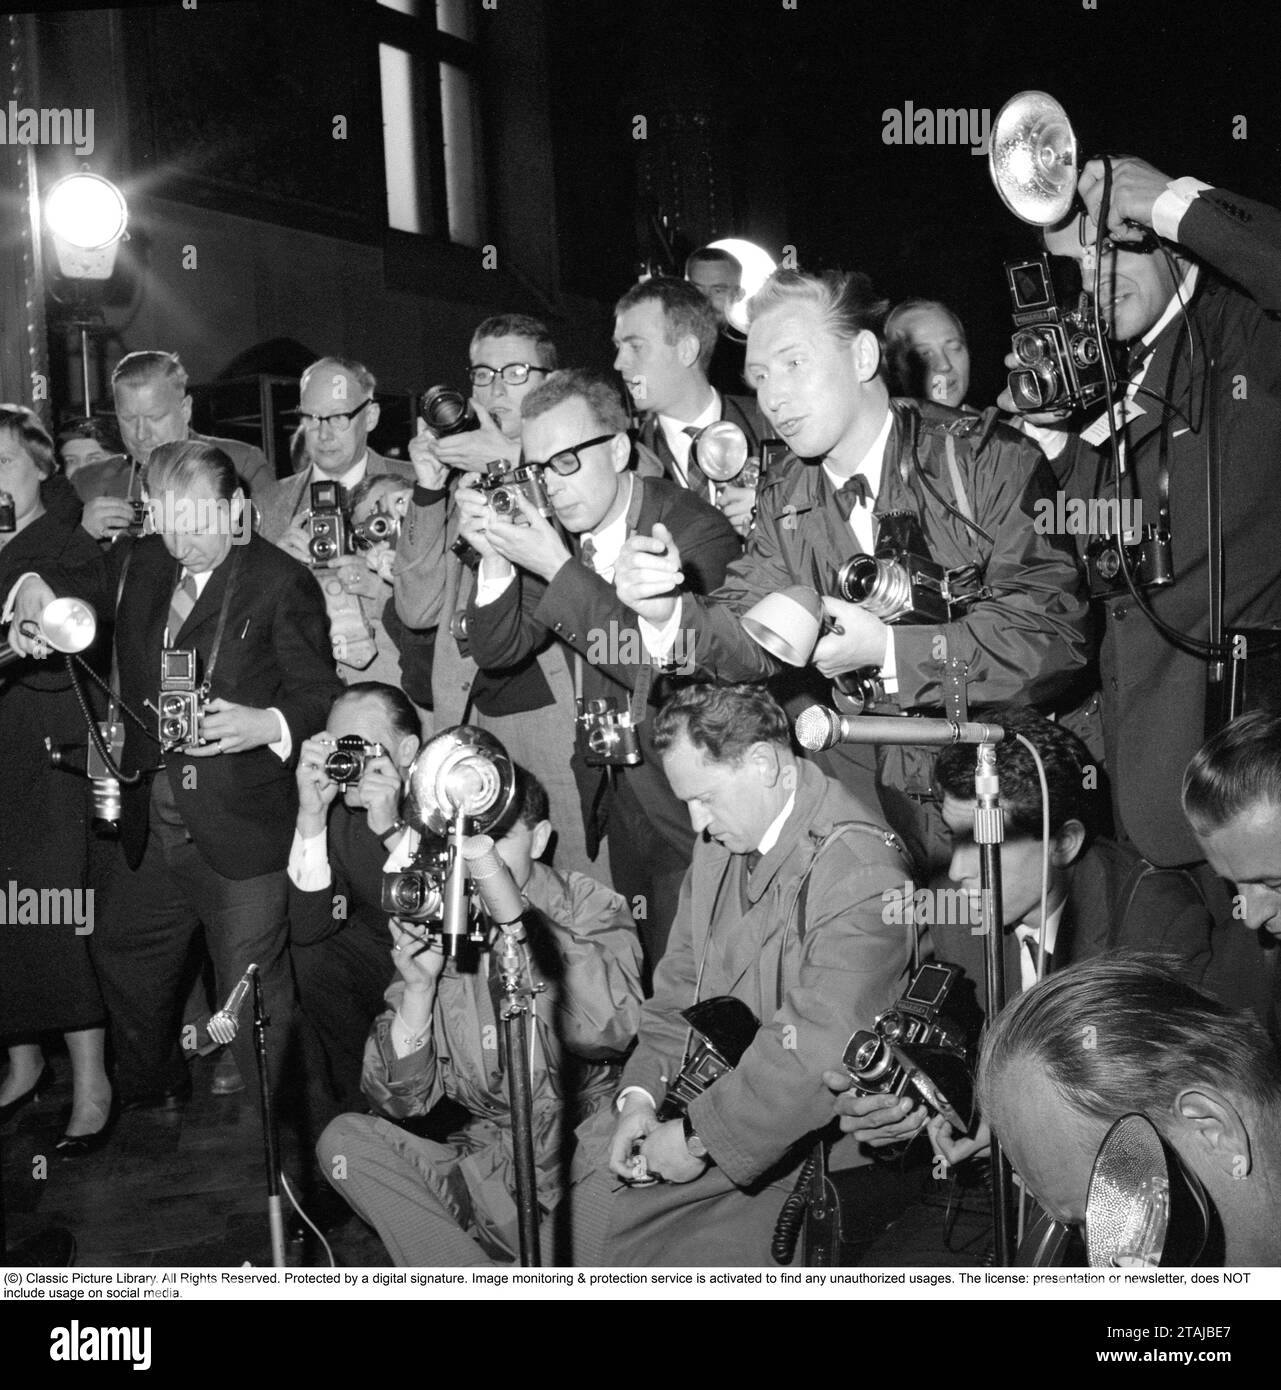 Press photographers. Media is very interested in covering the wedding  of Princess Birgitta of Sweden with prince Johann Georg of Hohenzollern-Sigmaringen in Sigmaringens church may 30 1961. The pressphotographers at the event are all trying to get good pictures of the couple. Many different cameras are visible, Rolleiflex, Hasselblad, Leica. Stock Photo